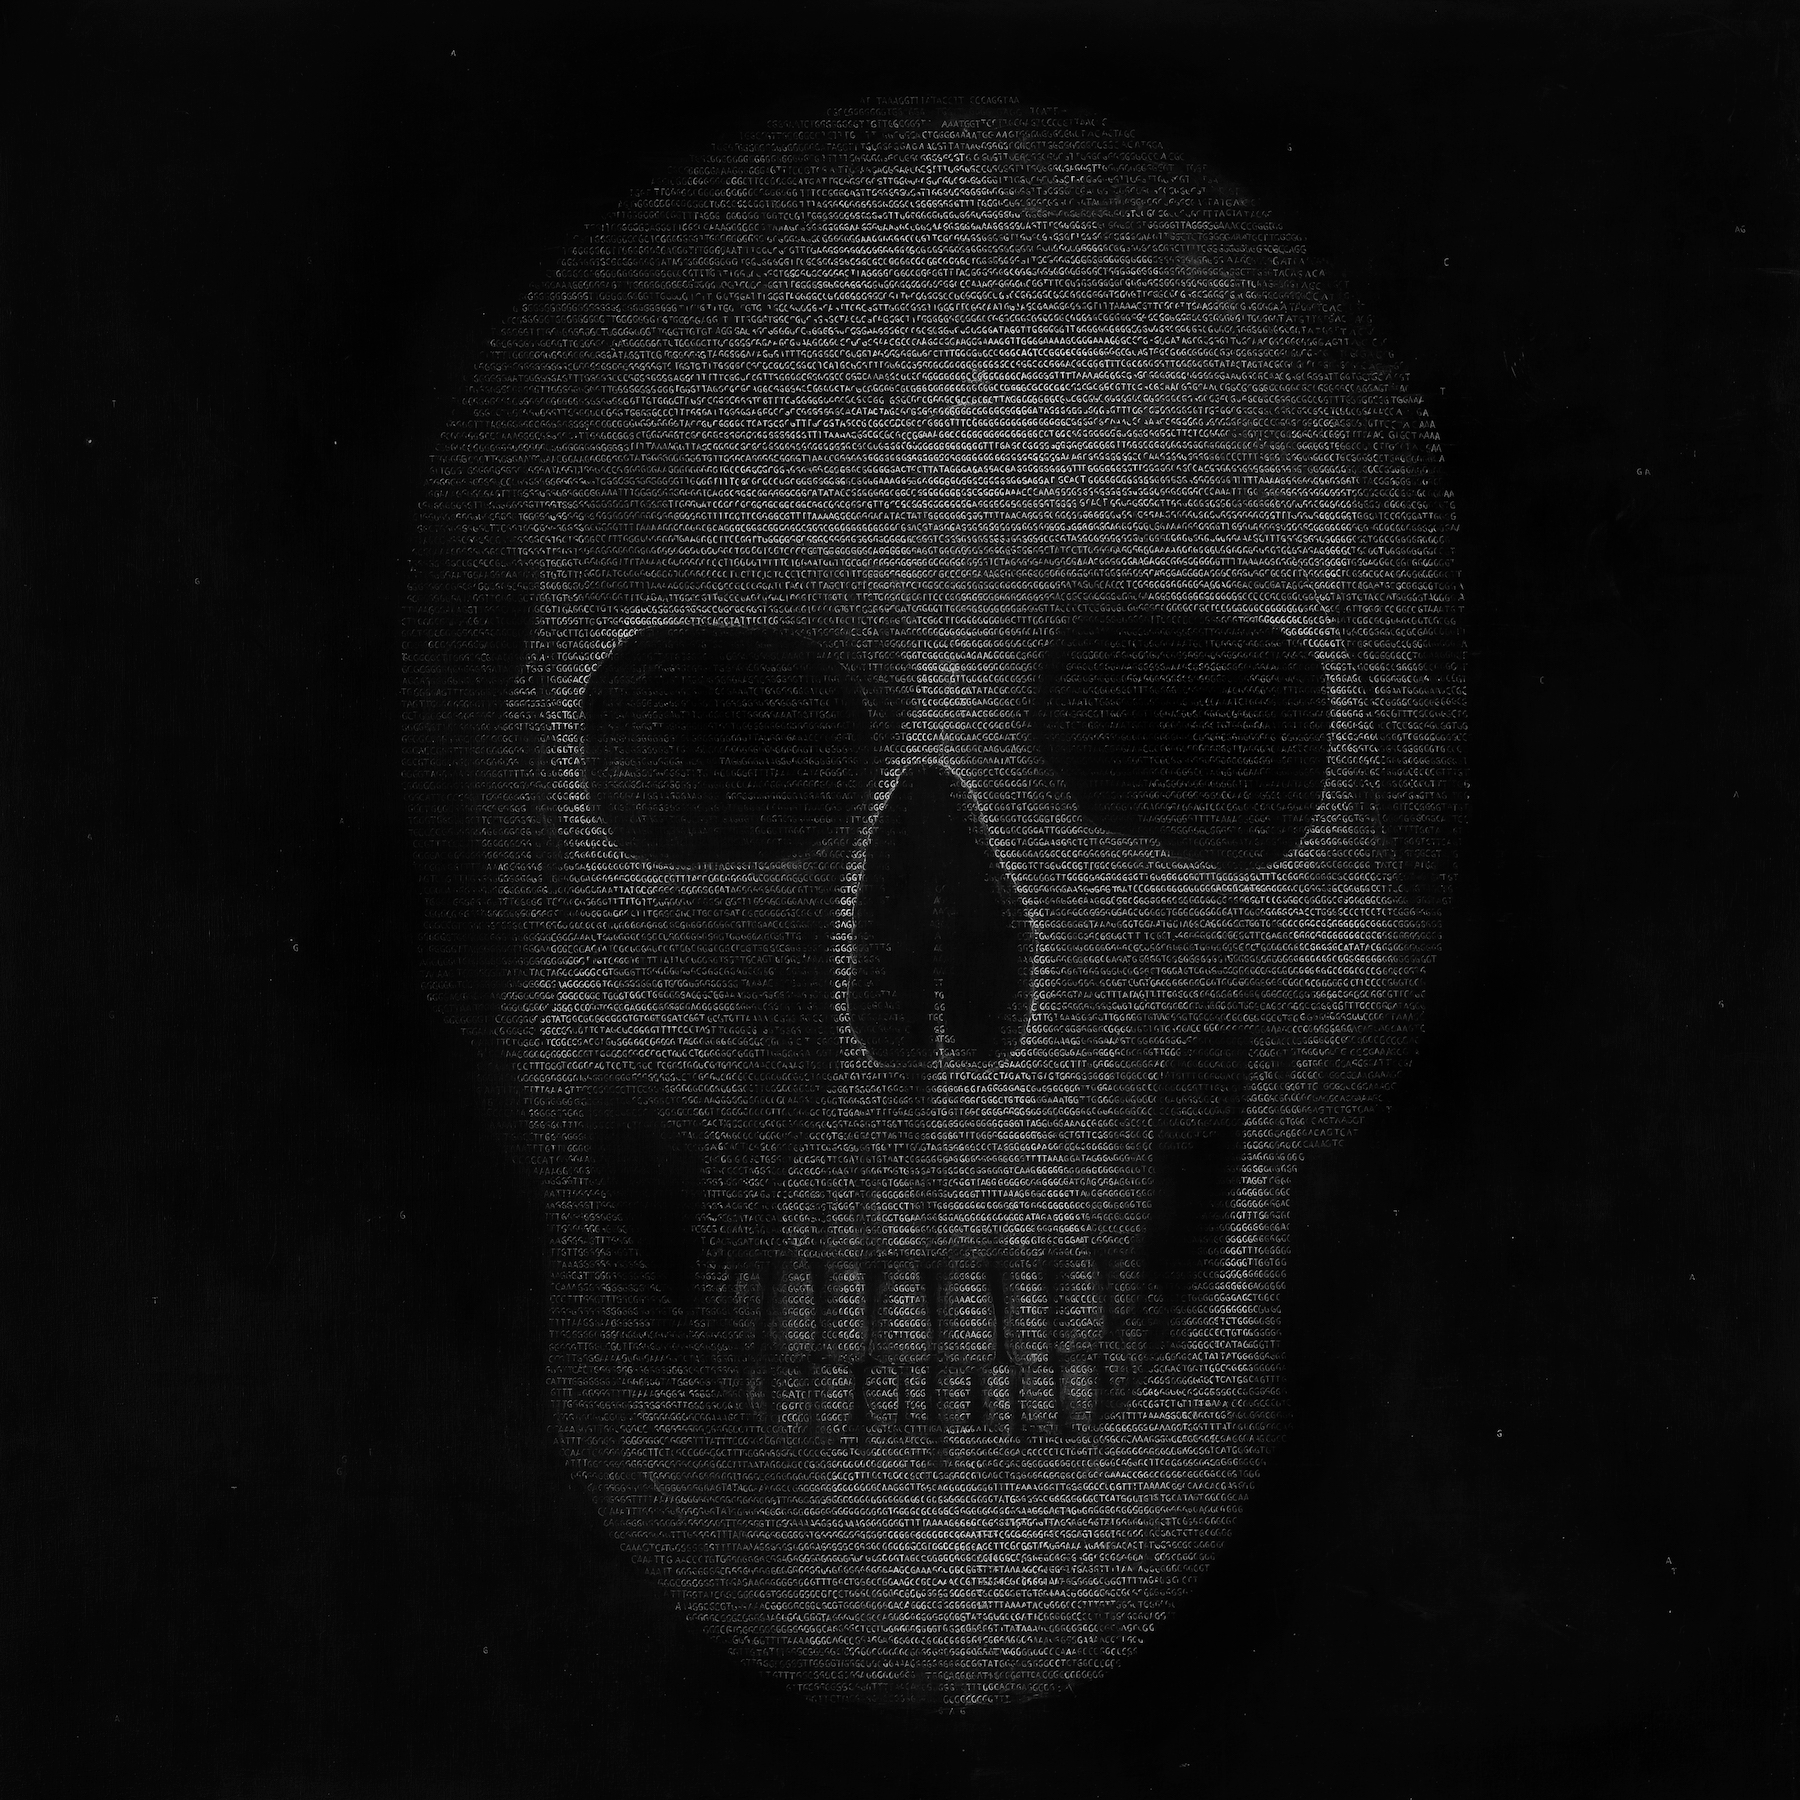 Skull in front of a dark background